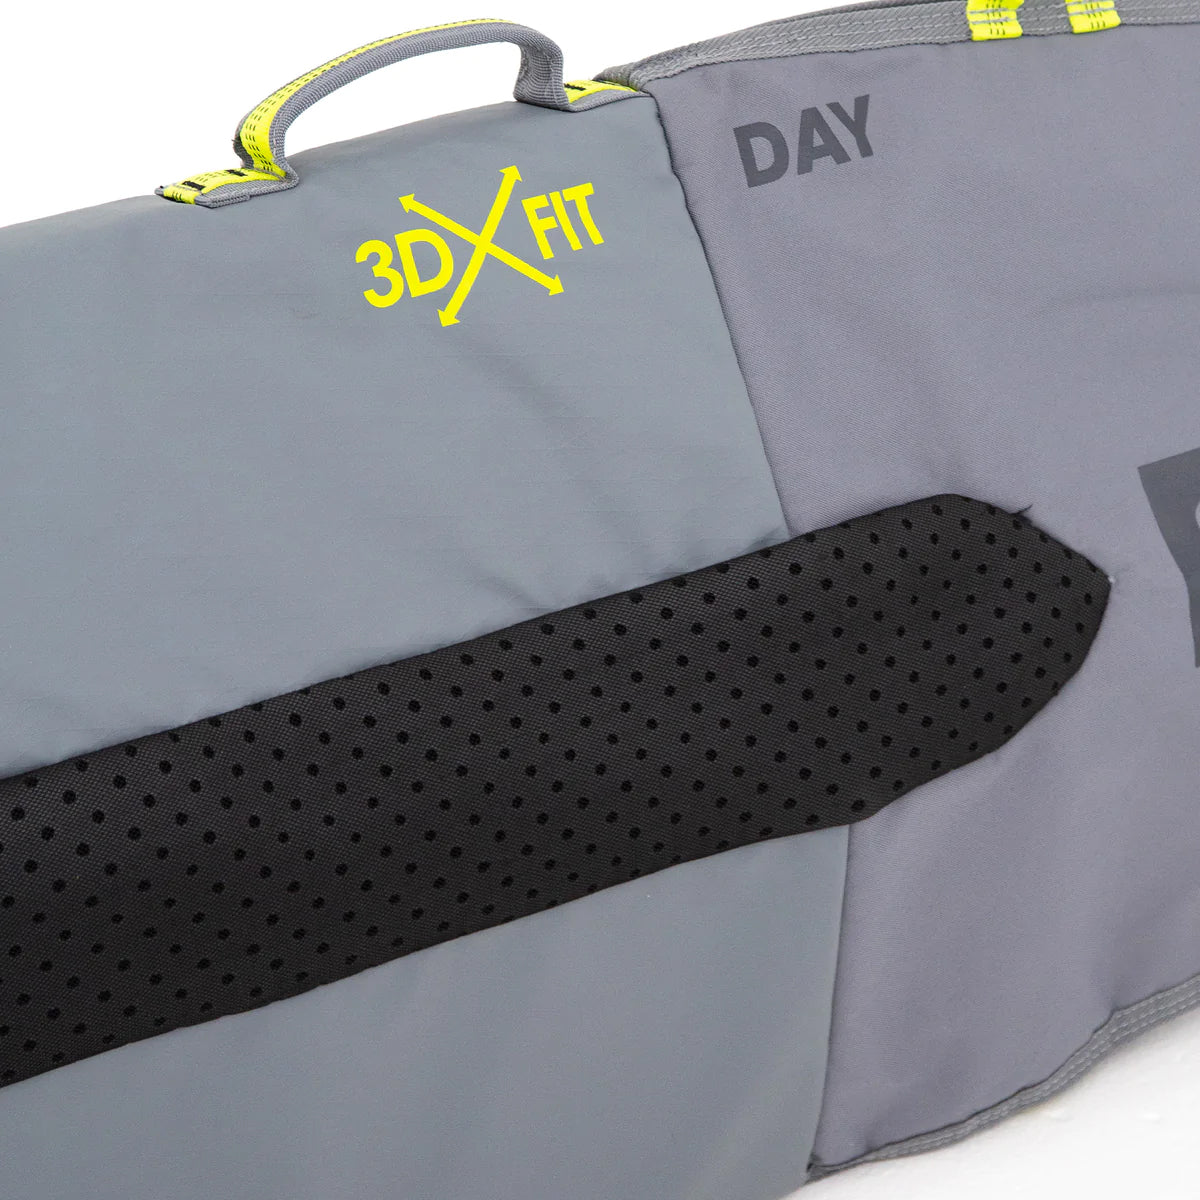 FCS 5'6" All Purpose Day Bag